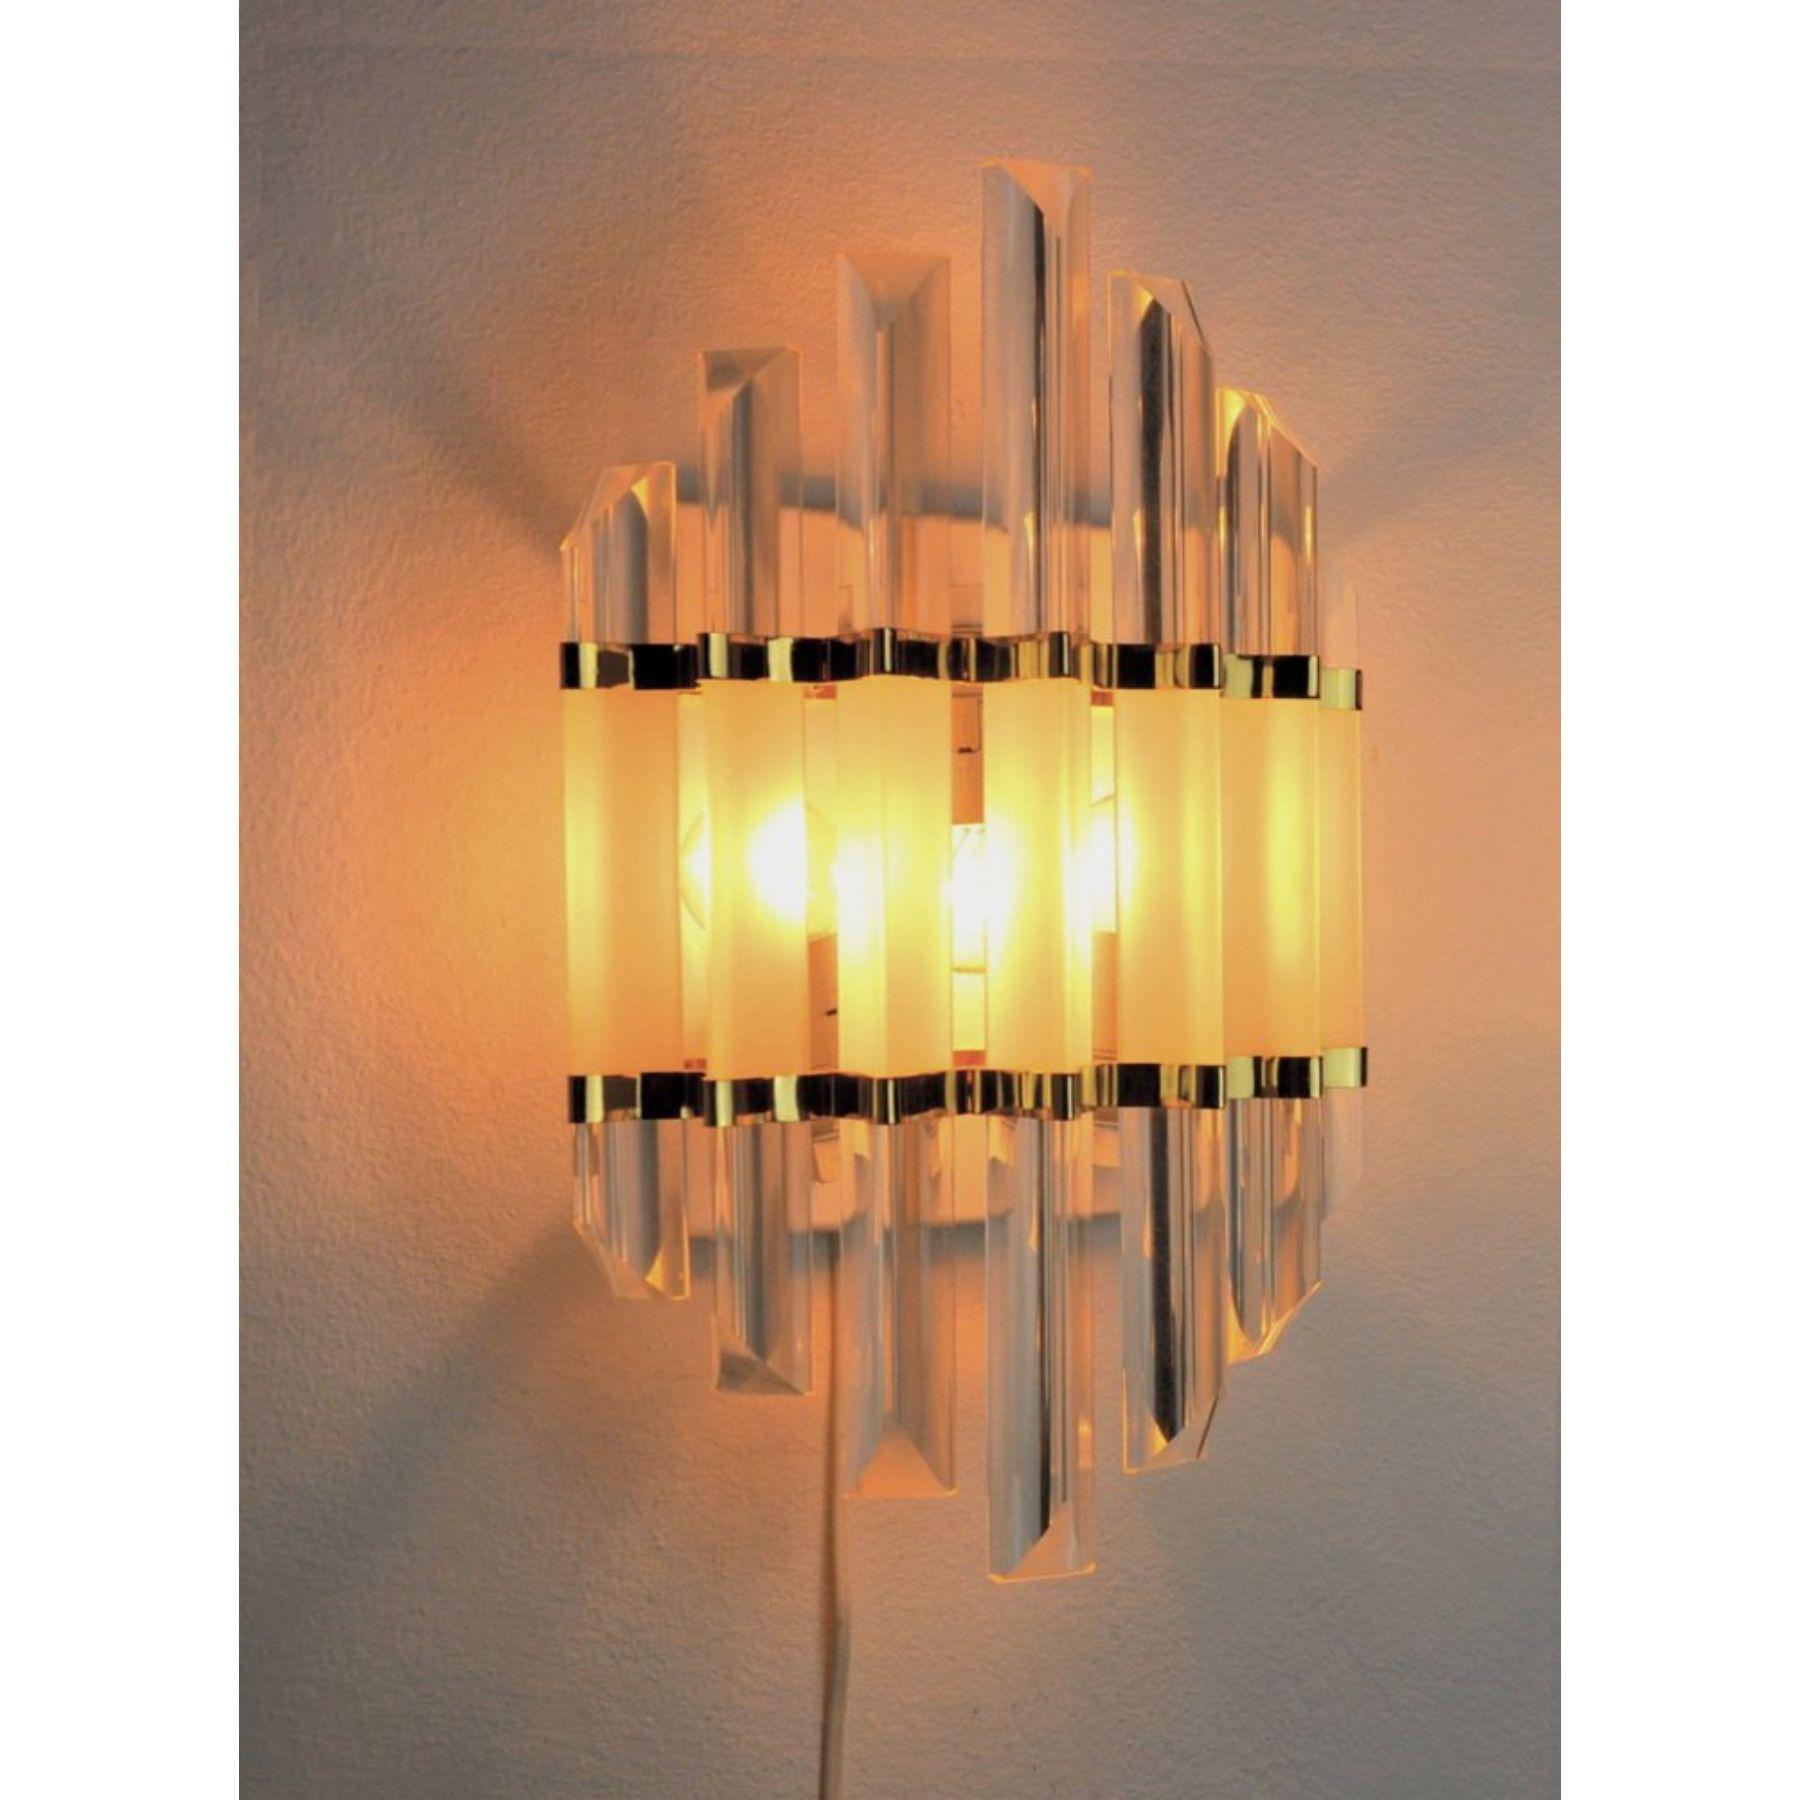 Very nice wall lamp venini dating from the 70s. Glass triedri and golden metal structure. Unique object which will know how to illuminate and bring a true design touch to your interior. Electricity verified, mark of time relative to the age of the